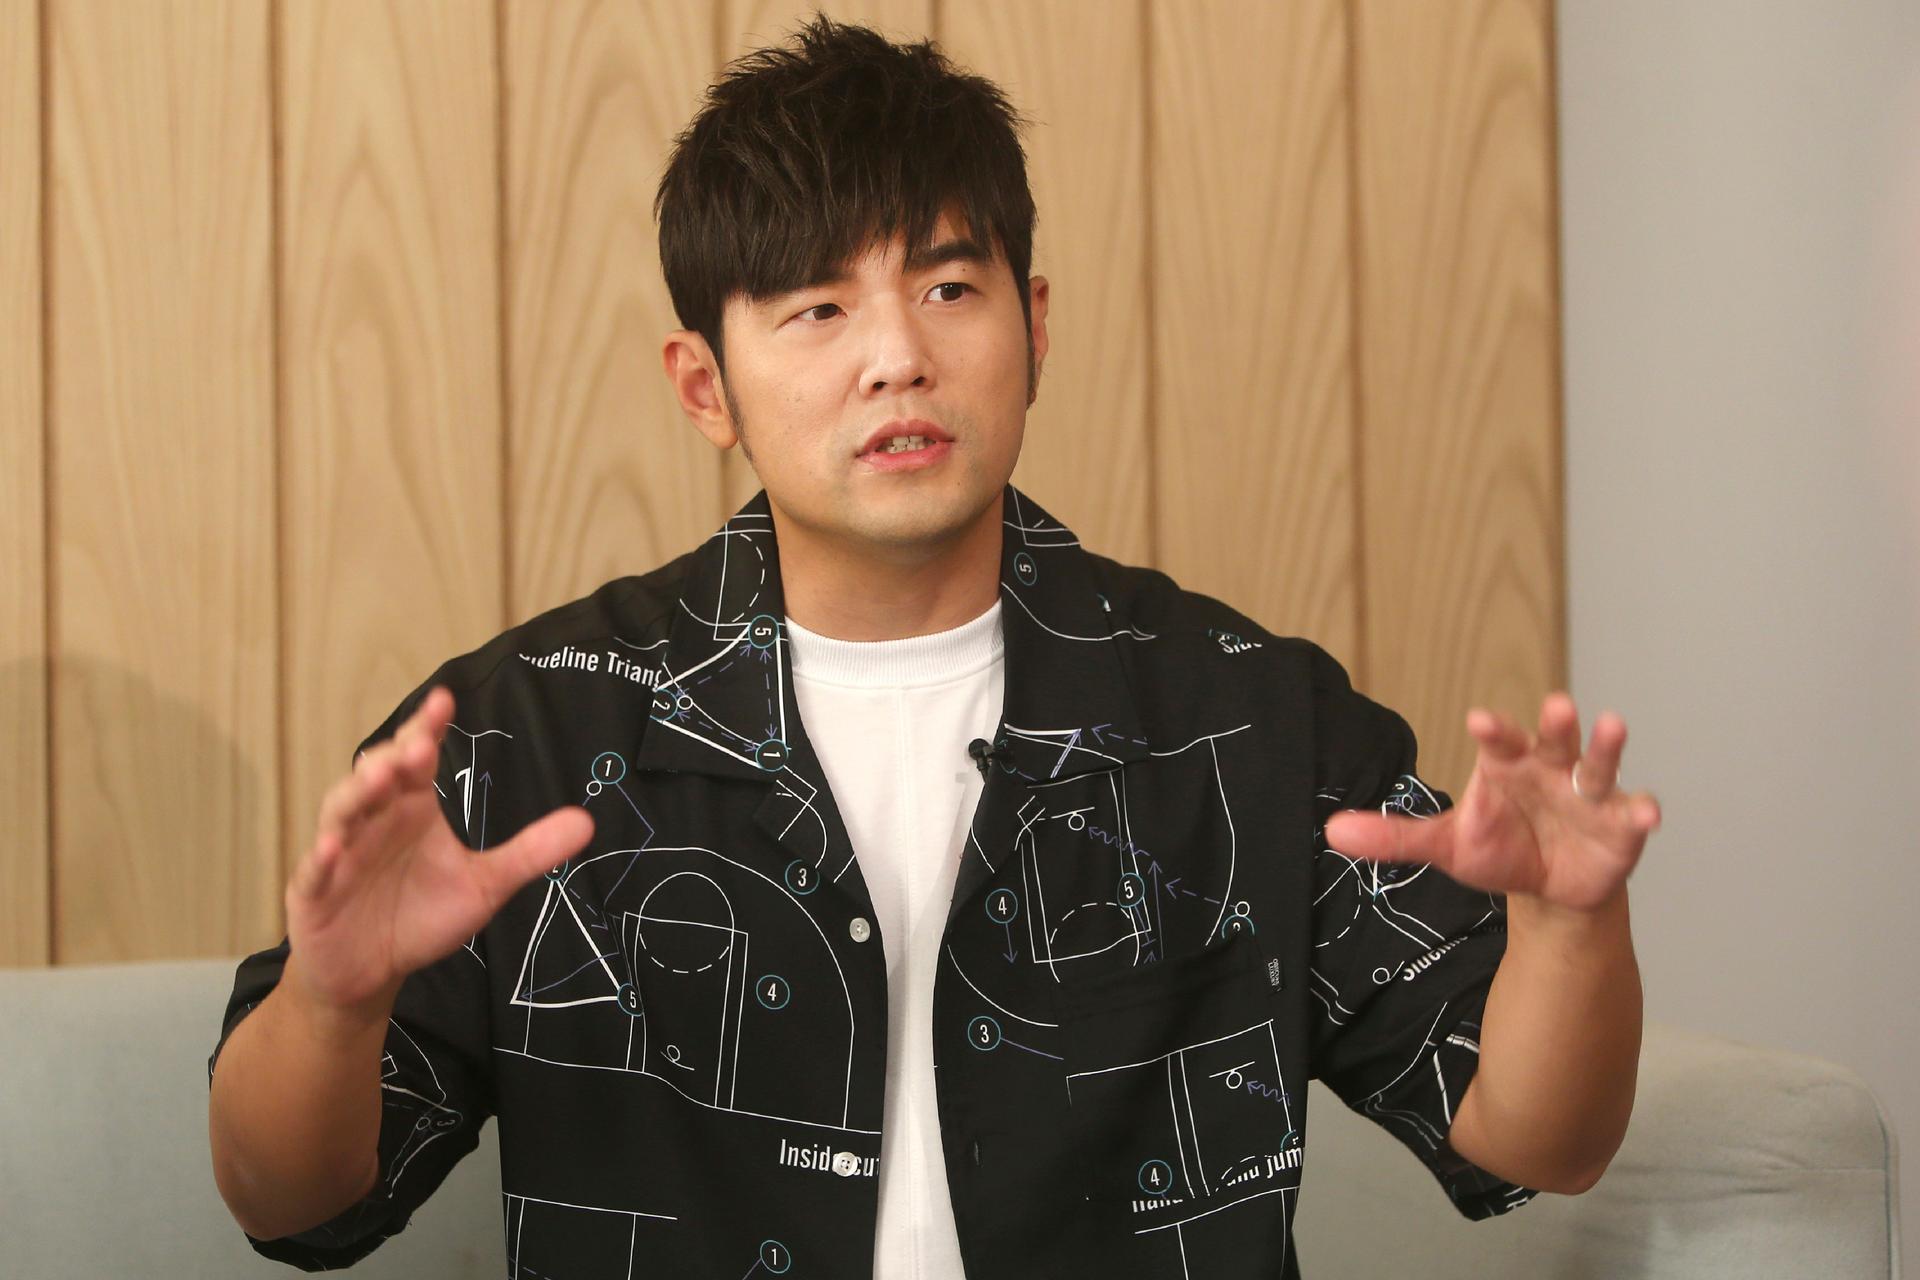 Mandopop superstar Jay Chou gestures while talking about his latest Netflix show 